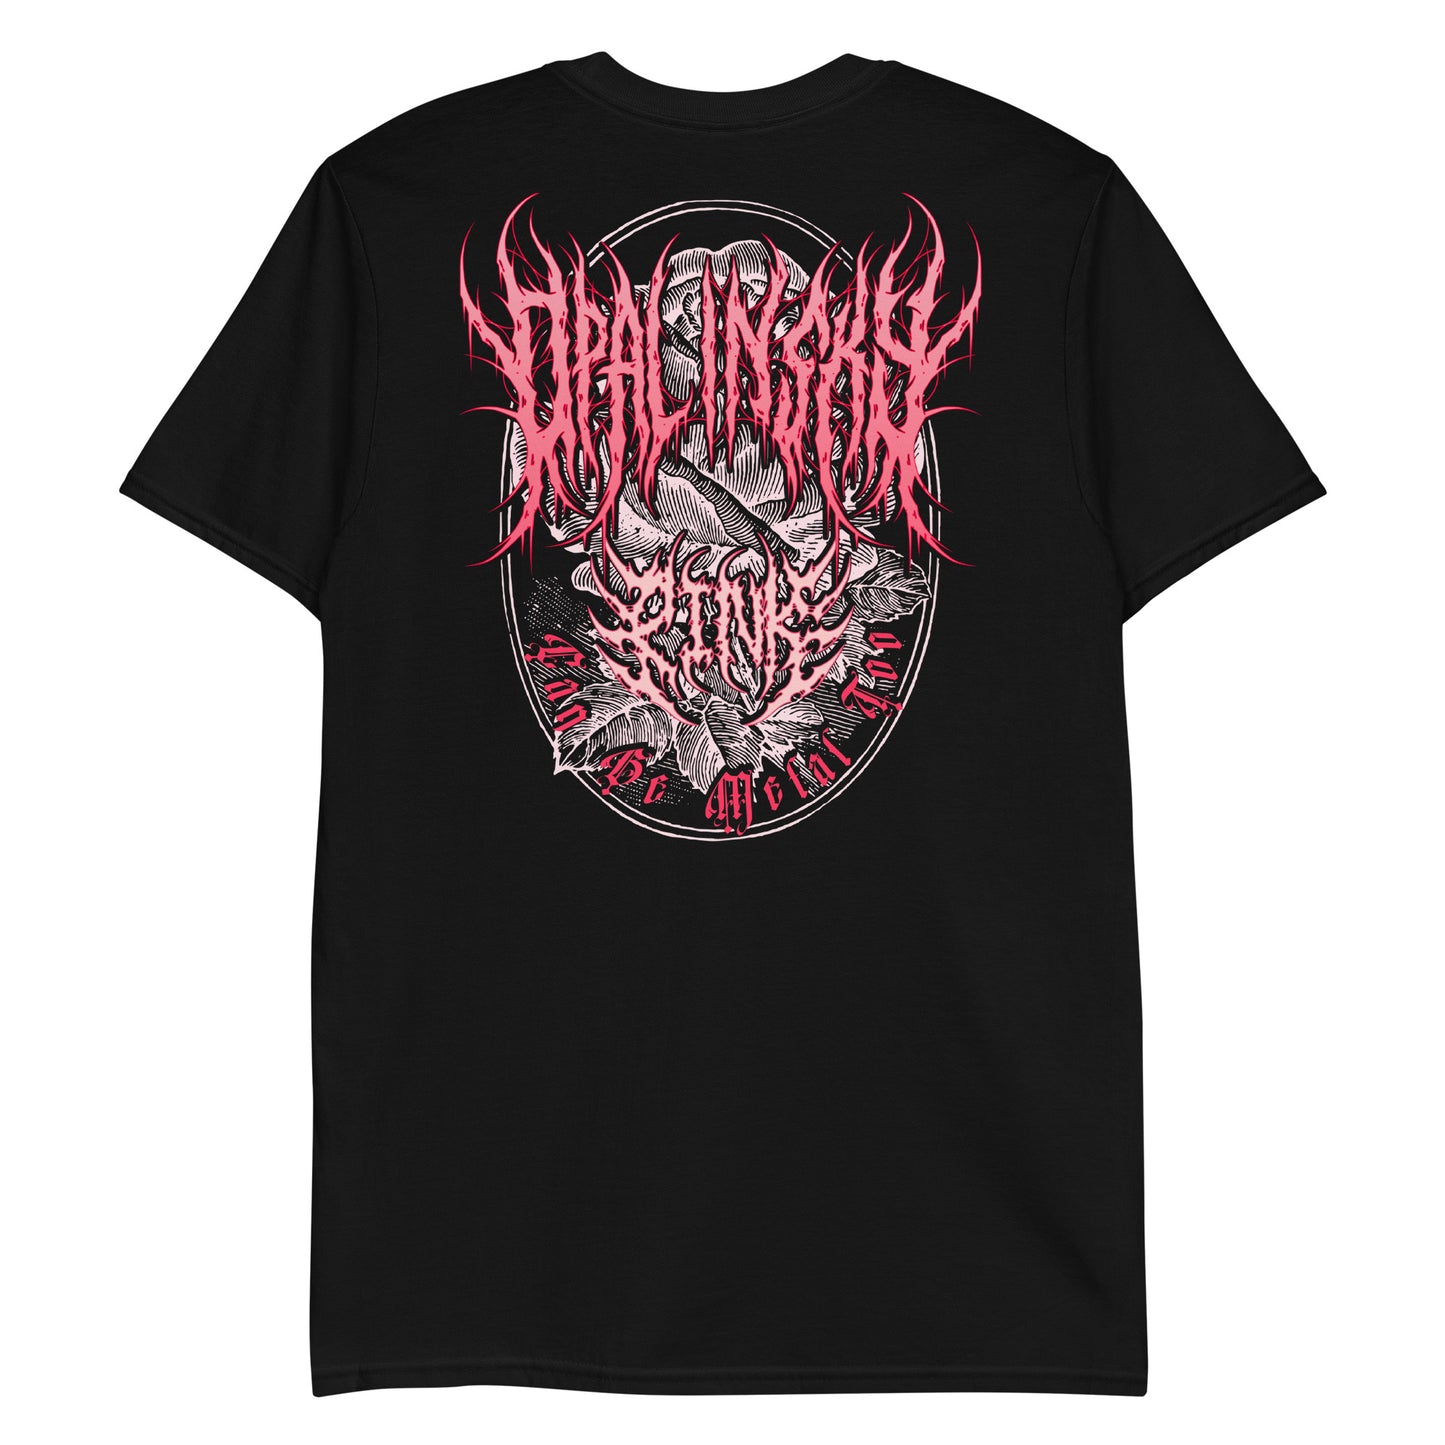 OPAL IN SKY "Pink Can Be Metal Too" Front/Back Unisex T-Shirt